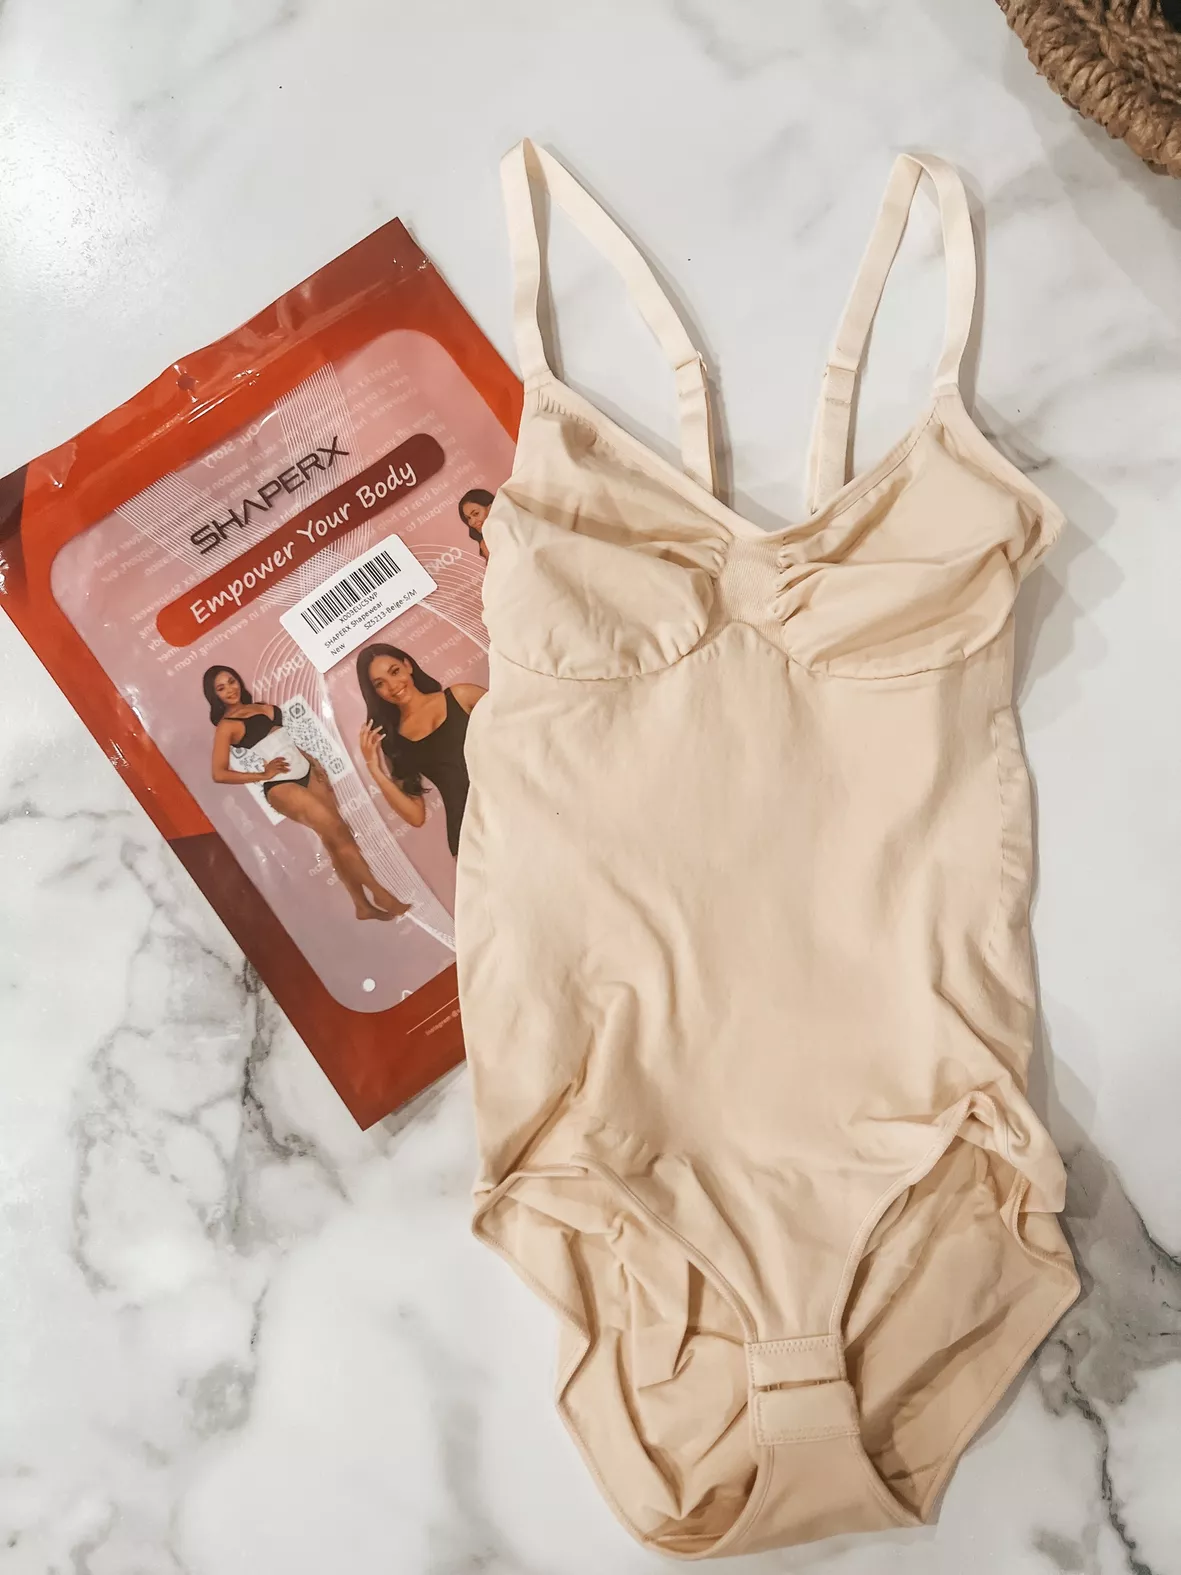 Giving the Gift of Shapewear: Is It Possible?